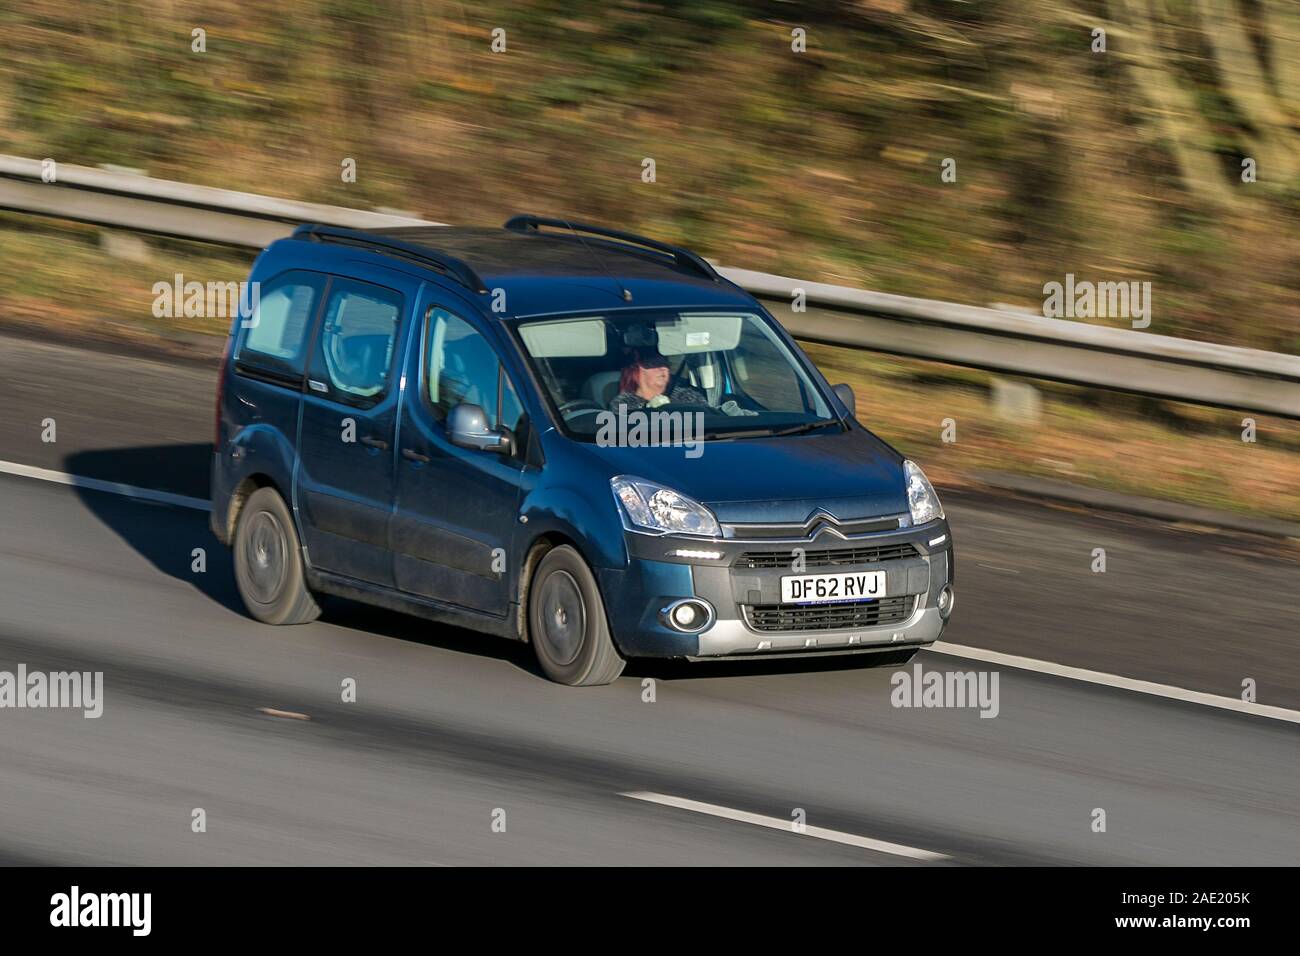 Blurred moving car 2012 Citroen Berlingo M-Sp Air Xtr E-Hdi Sa traveling at speed on the M61 motorway Slow camera shutter speed vehicle movement Stock Photo